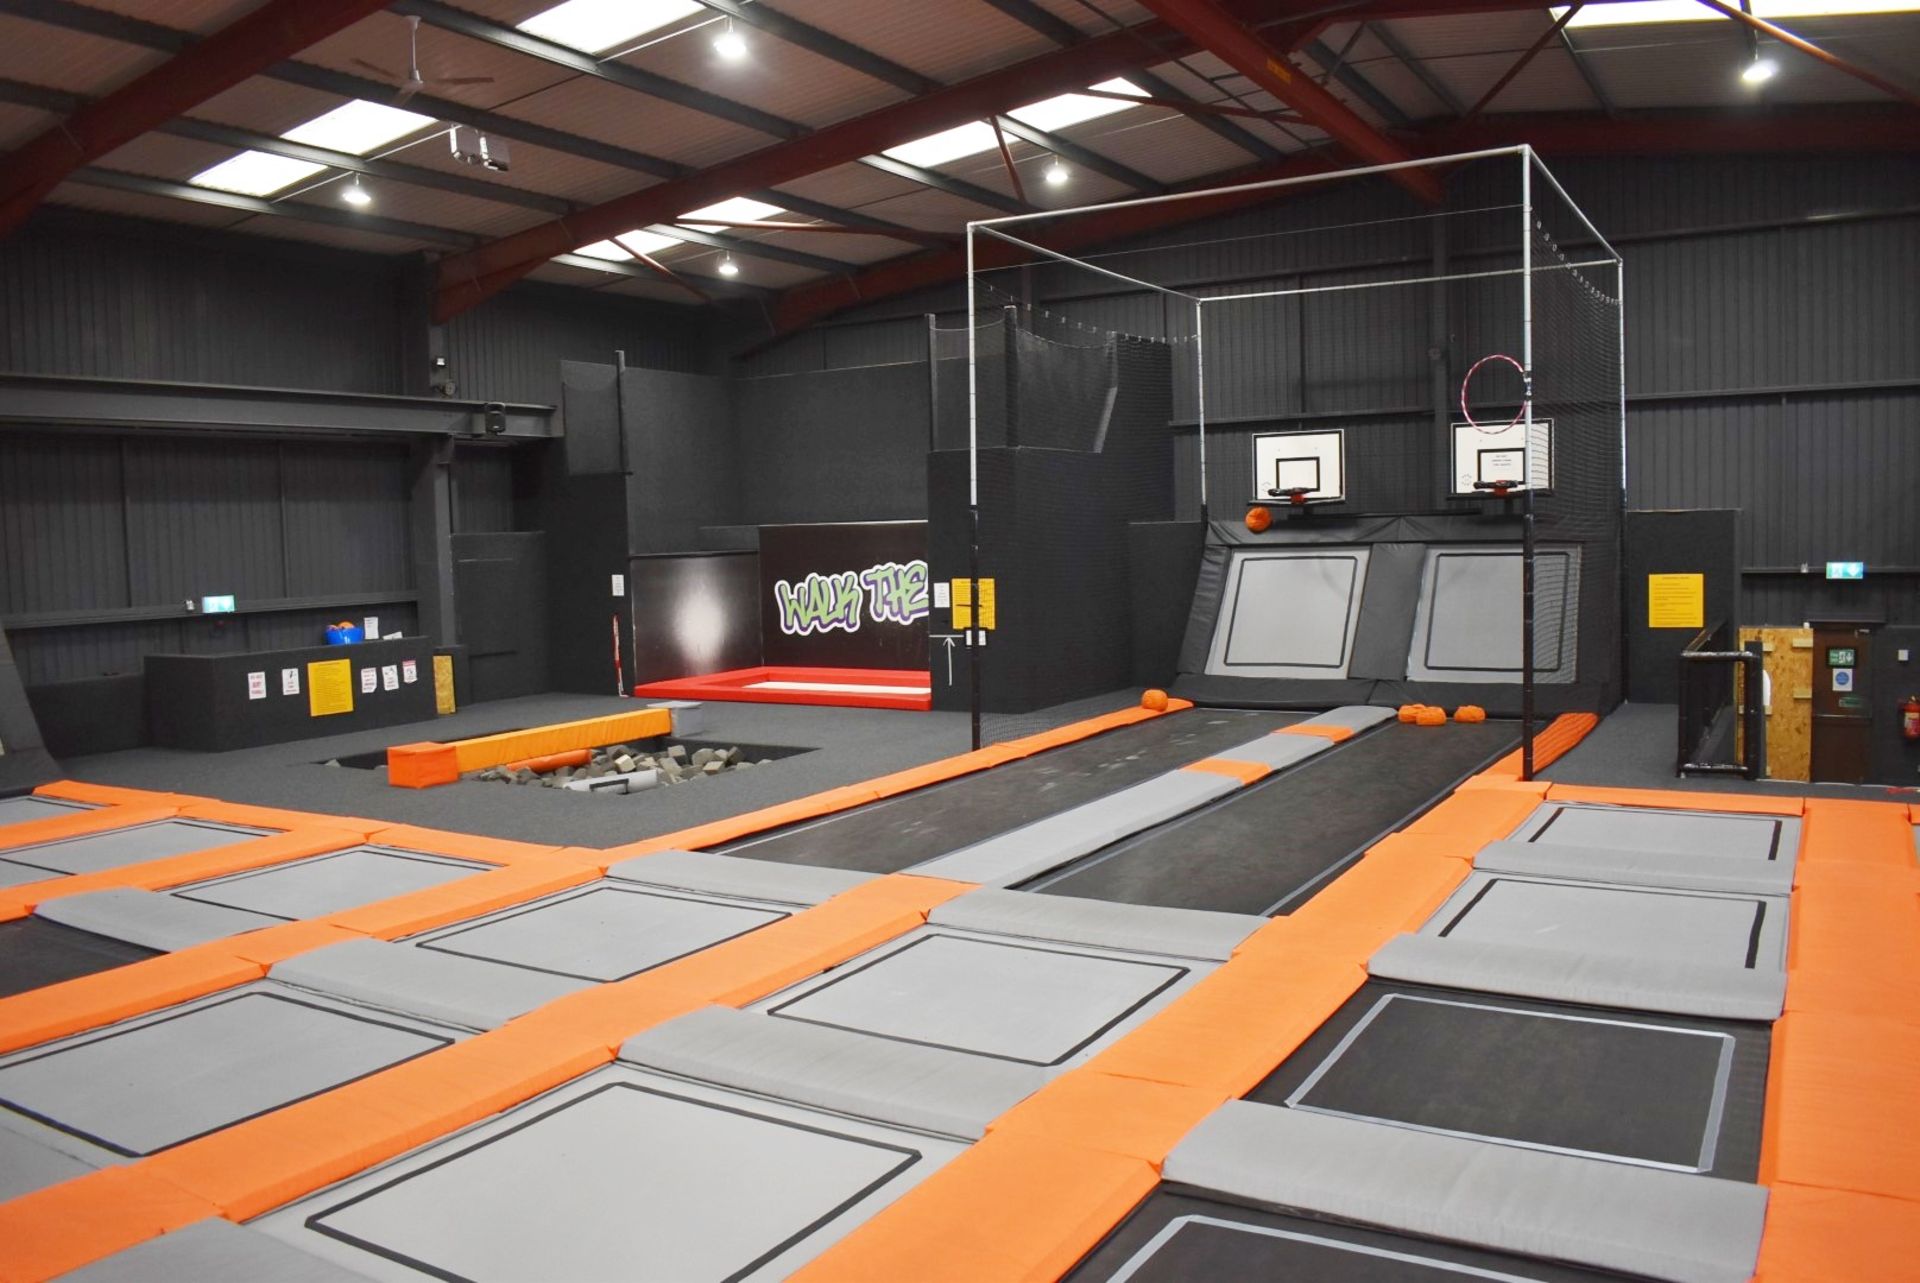 1 x Large Trampoline Park - Disassembled - Includes Dodgeball Arena And Jump Tower - CL766  - - Image 85 of 99